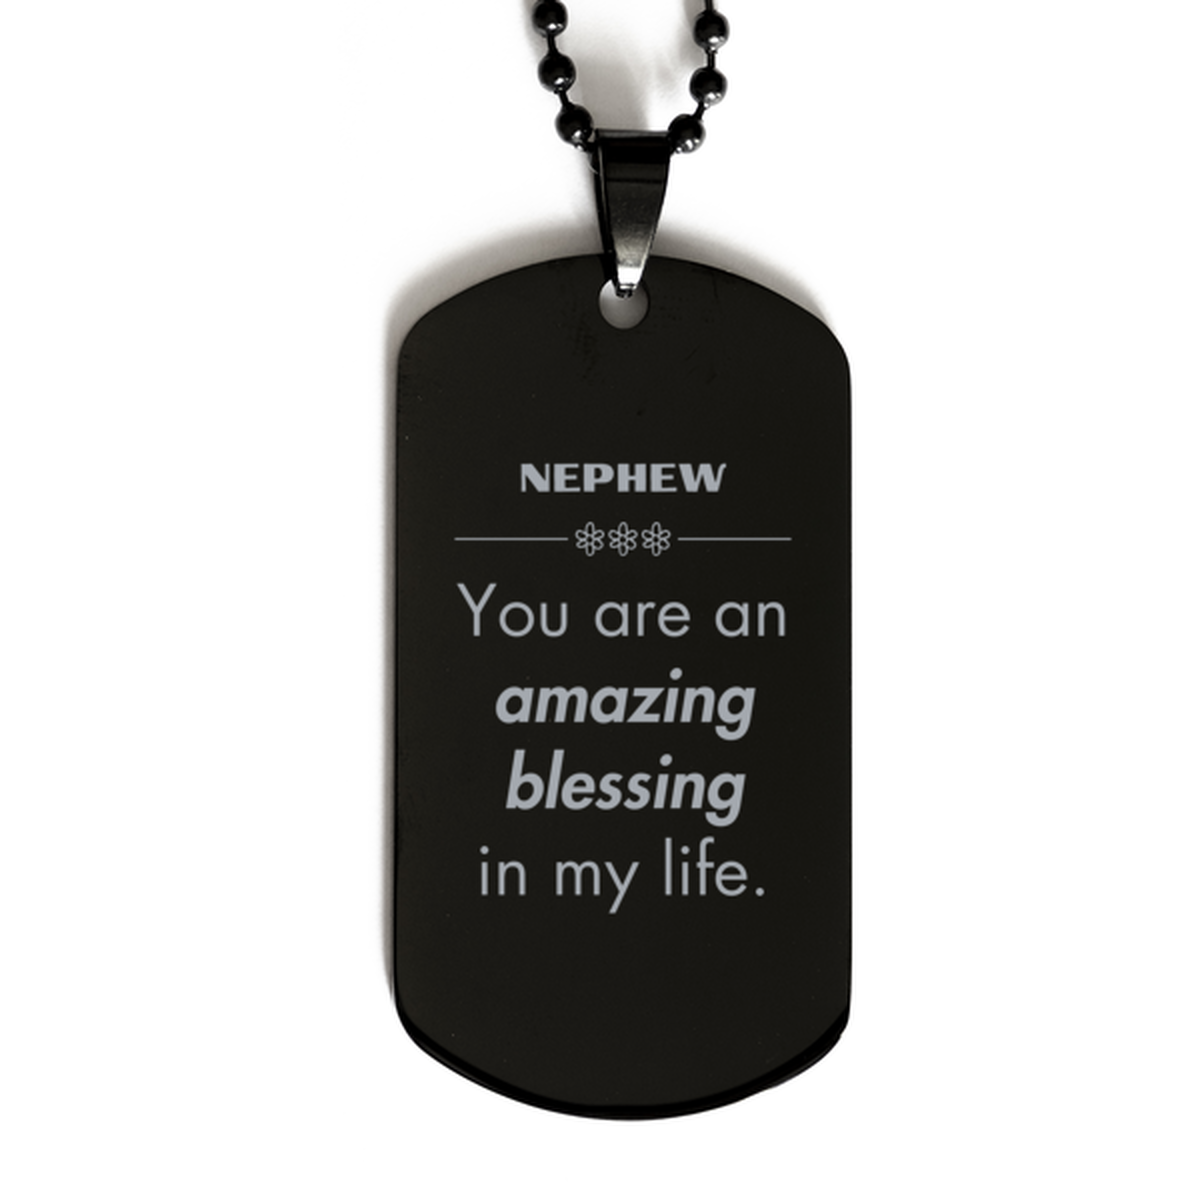 Nephew Black Dog Tag, You are an amazing blessing in my life, Thank You Gifts For Nephew, Inspirational Birthday Christmas Unique Gifts For Nephew